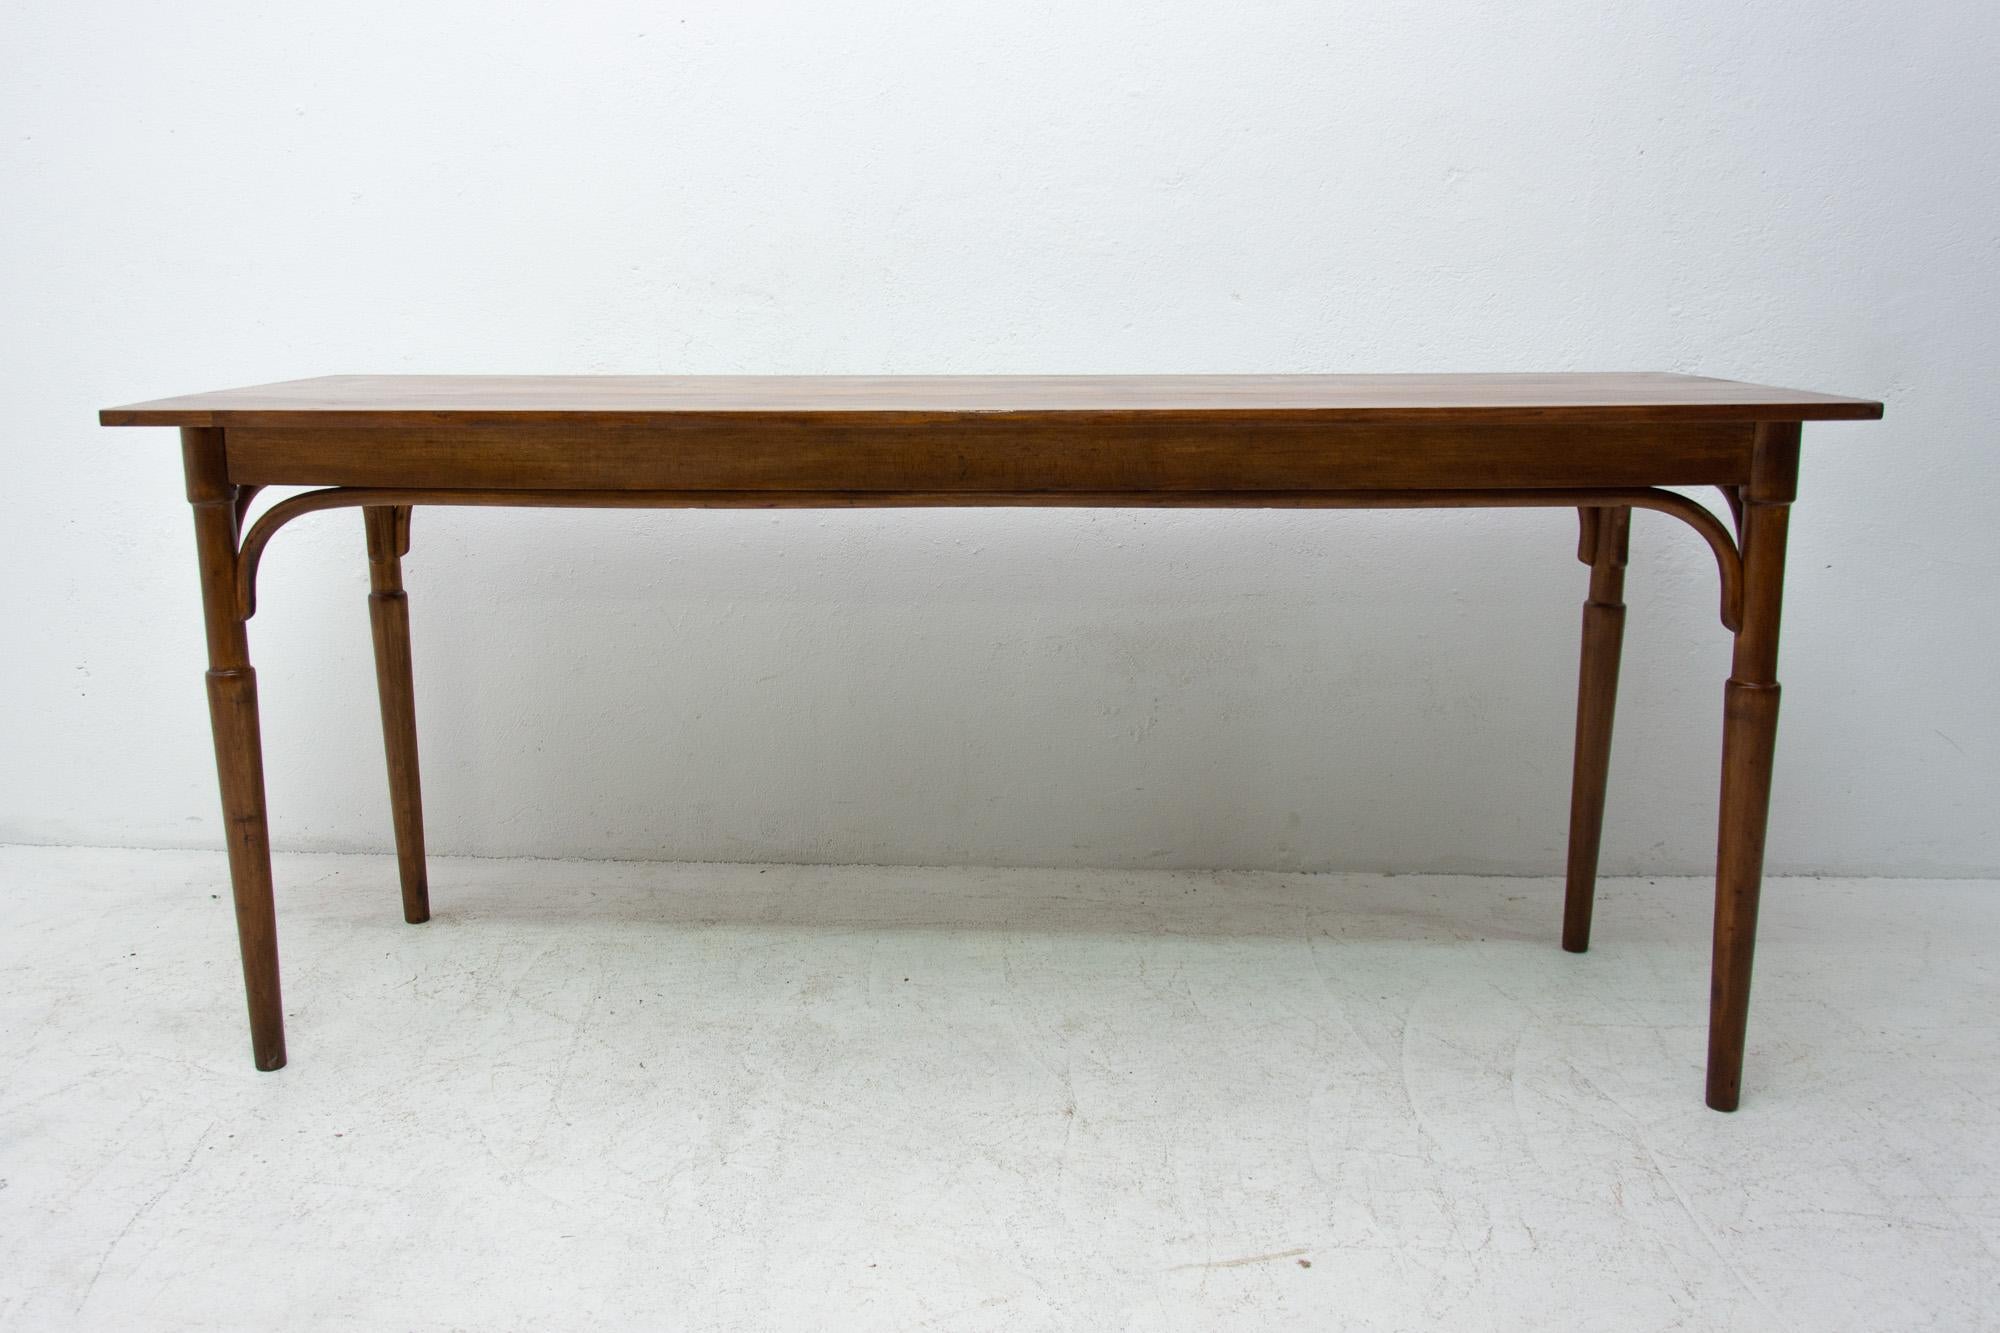 Scandinavian Modern Long Occasional Coffee Table in the Thonet Style, 1920s, Bohemia